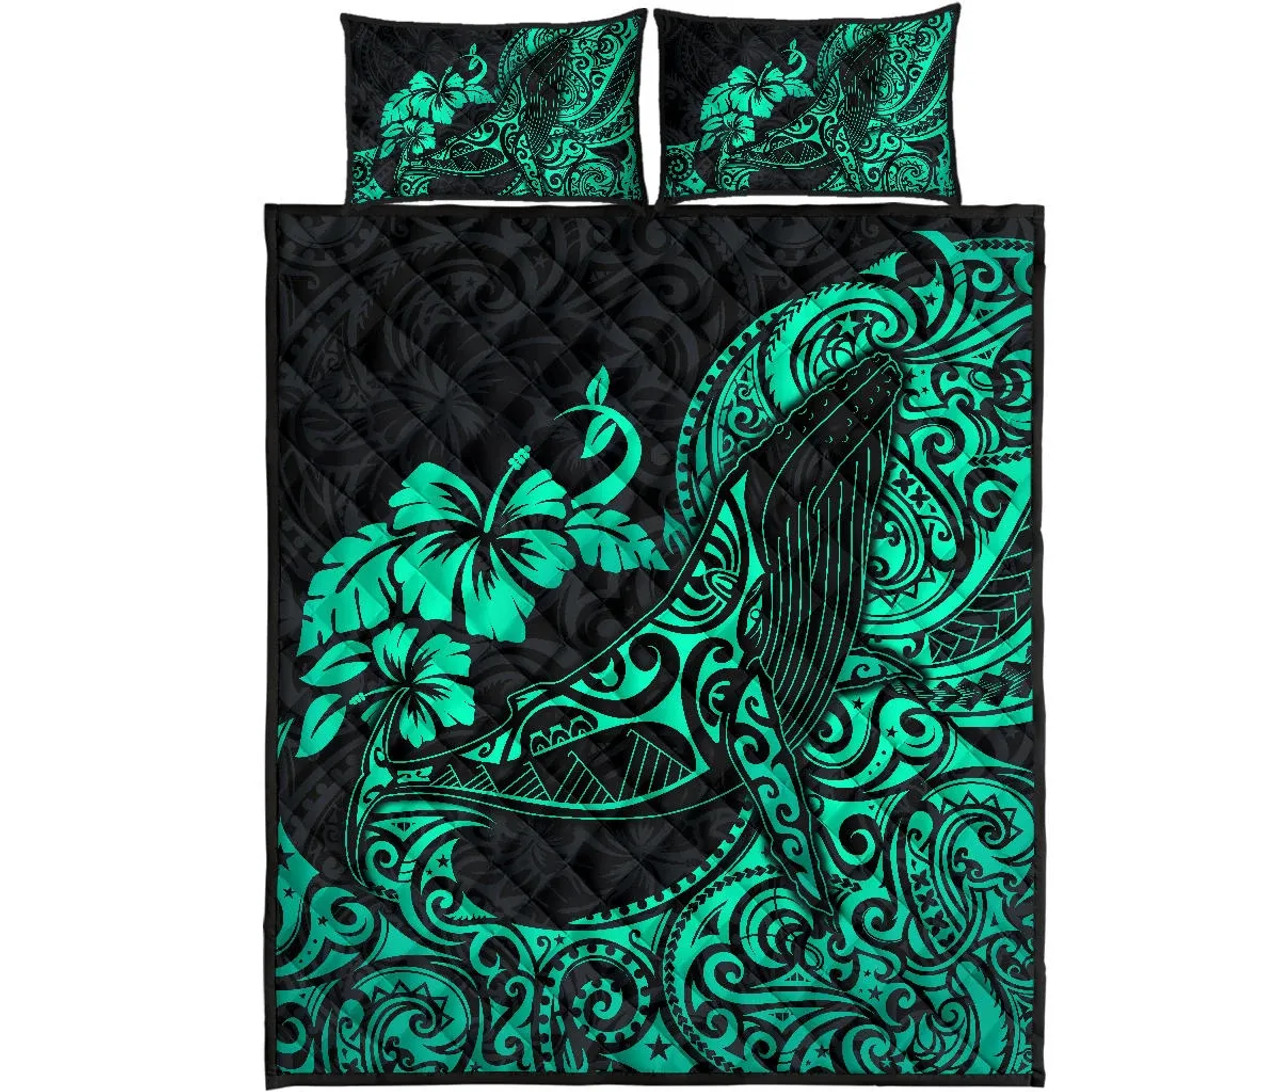 Polynesian Hawaii Quilt Bed Set - Polynesian Turquoise Humpback Whale 5